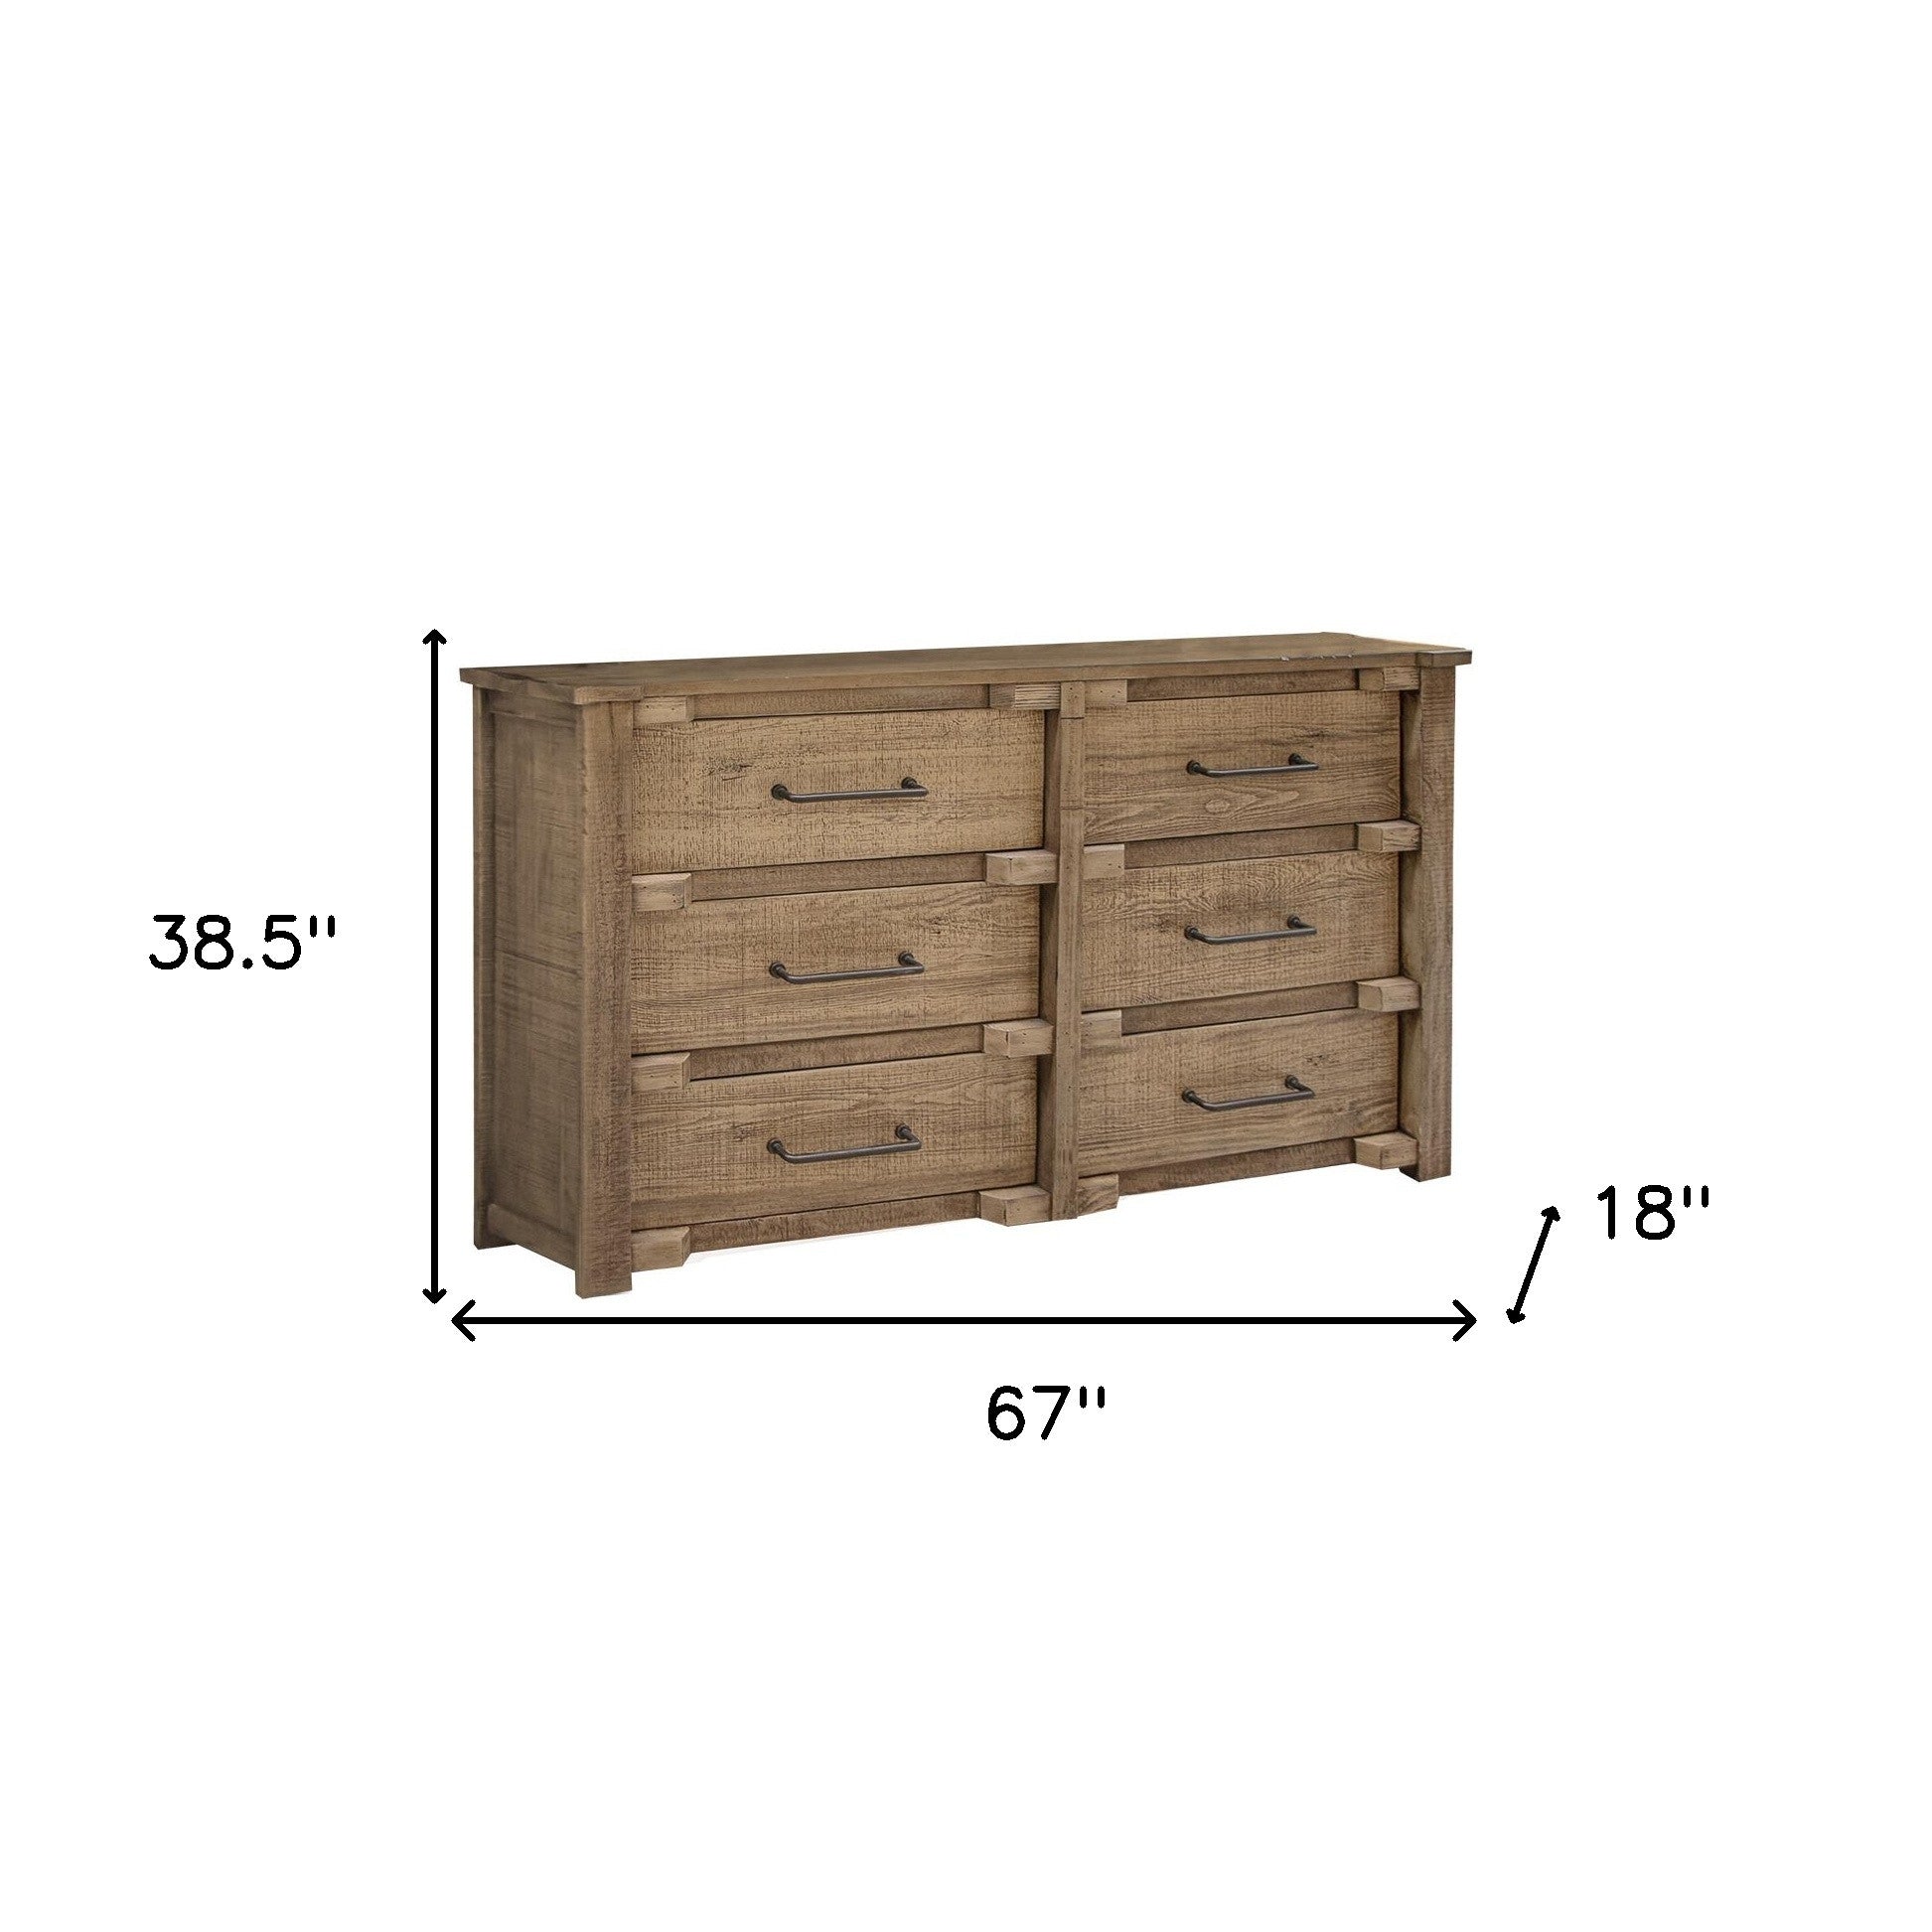 67" Natural Solid Wood Six Drawer Double Dresser